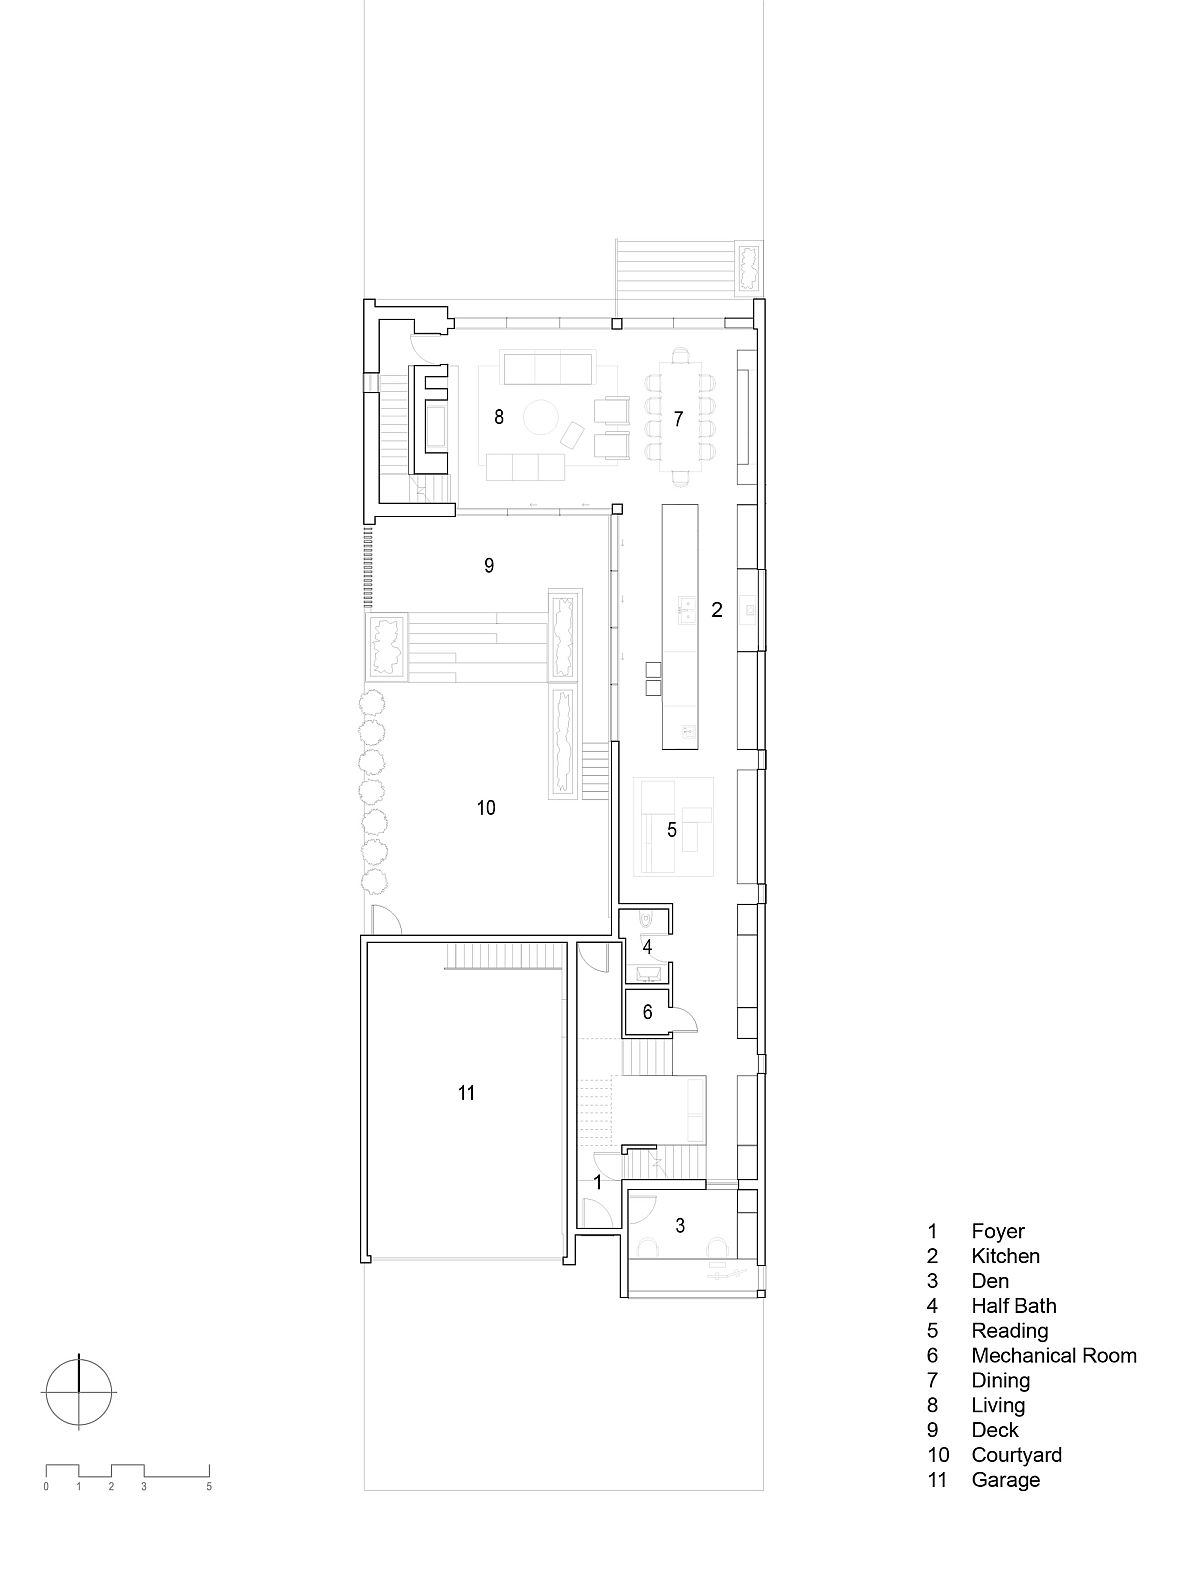 Floor-plan-of-New-House-in-Calgary-Canada-with-multi-level-interior